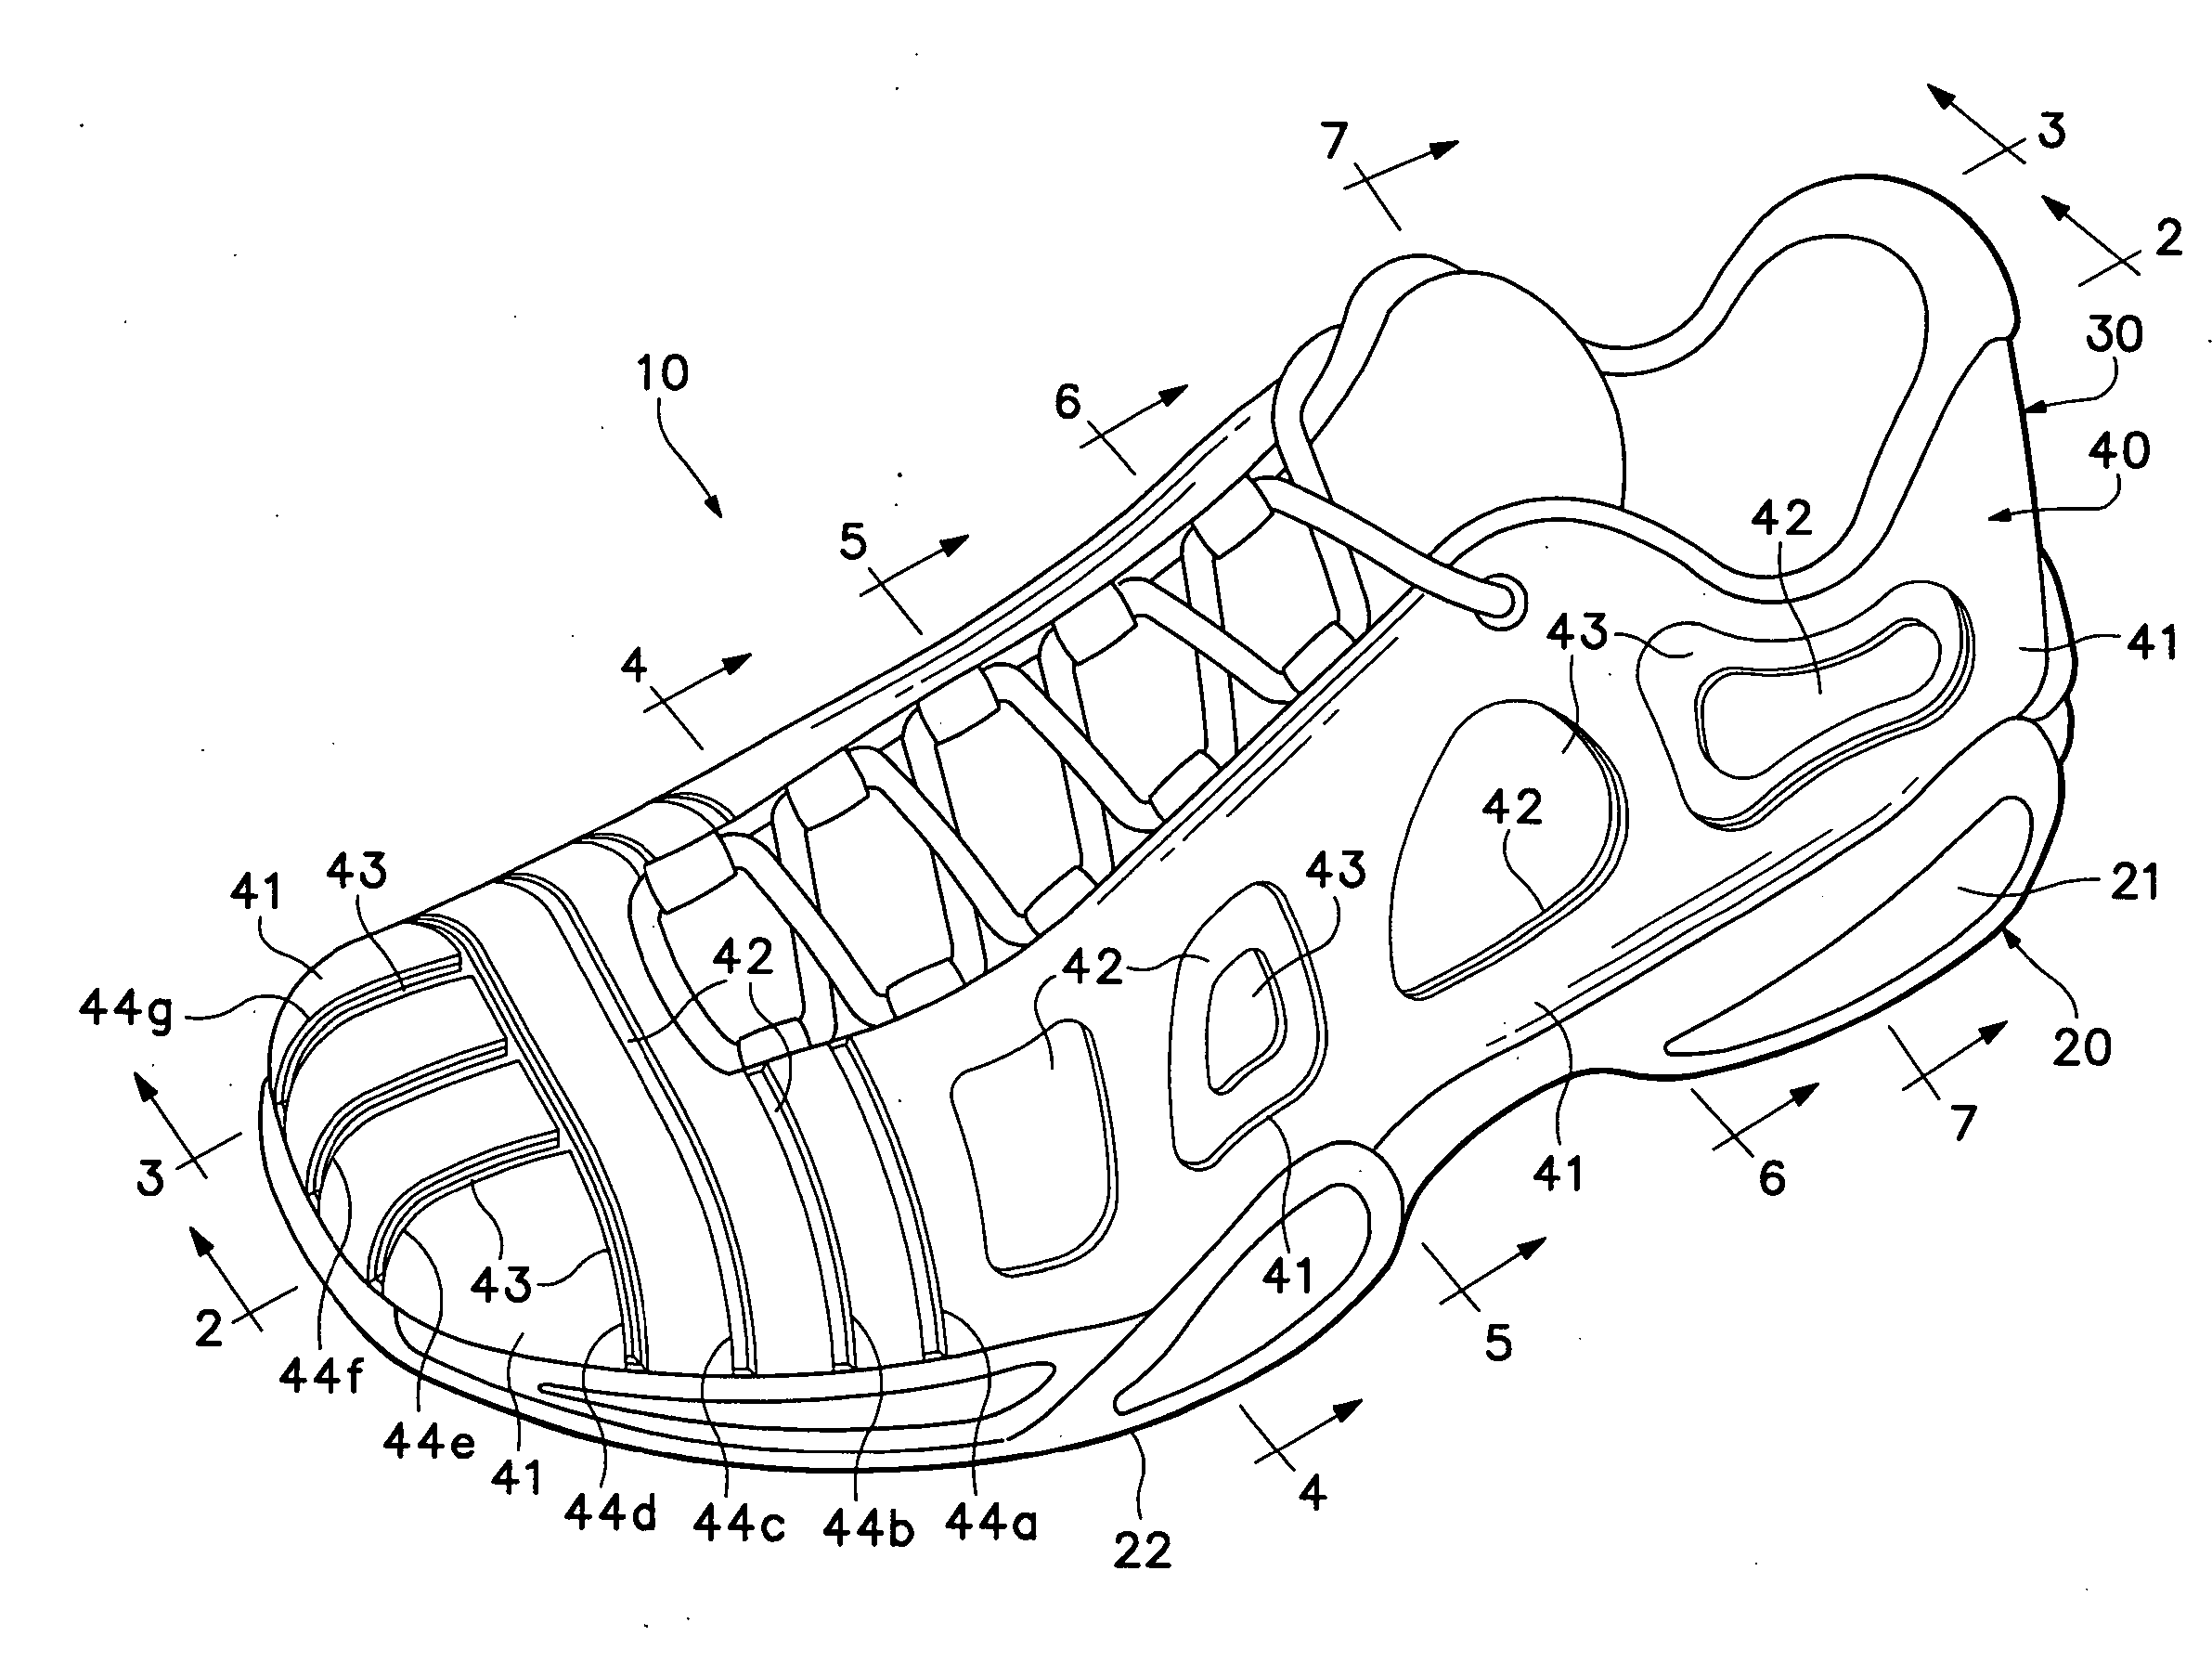 Article of apparel incorporating a stratified material